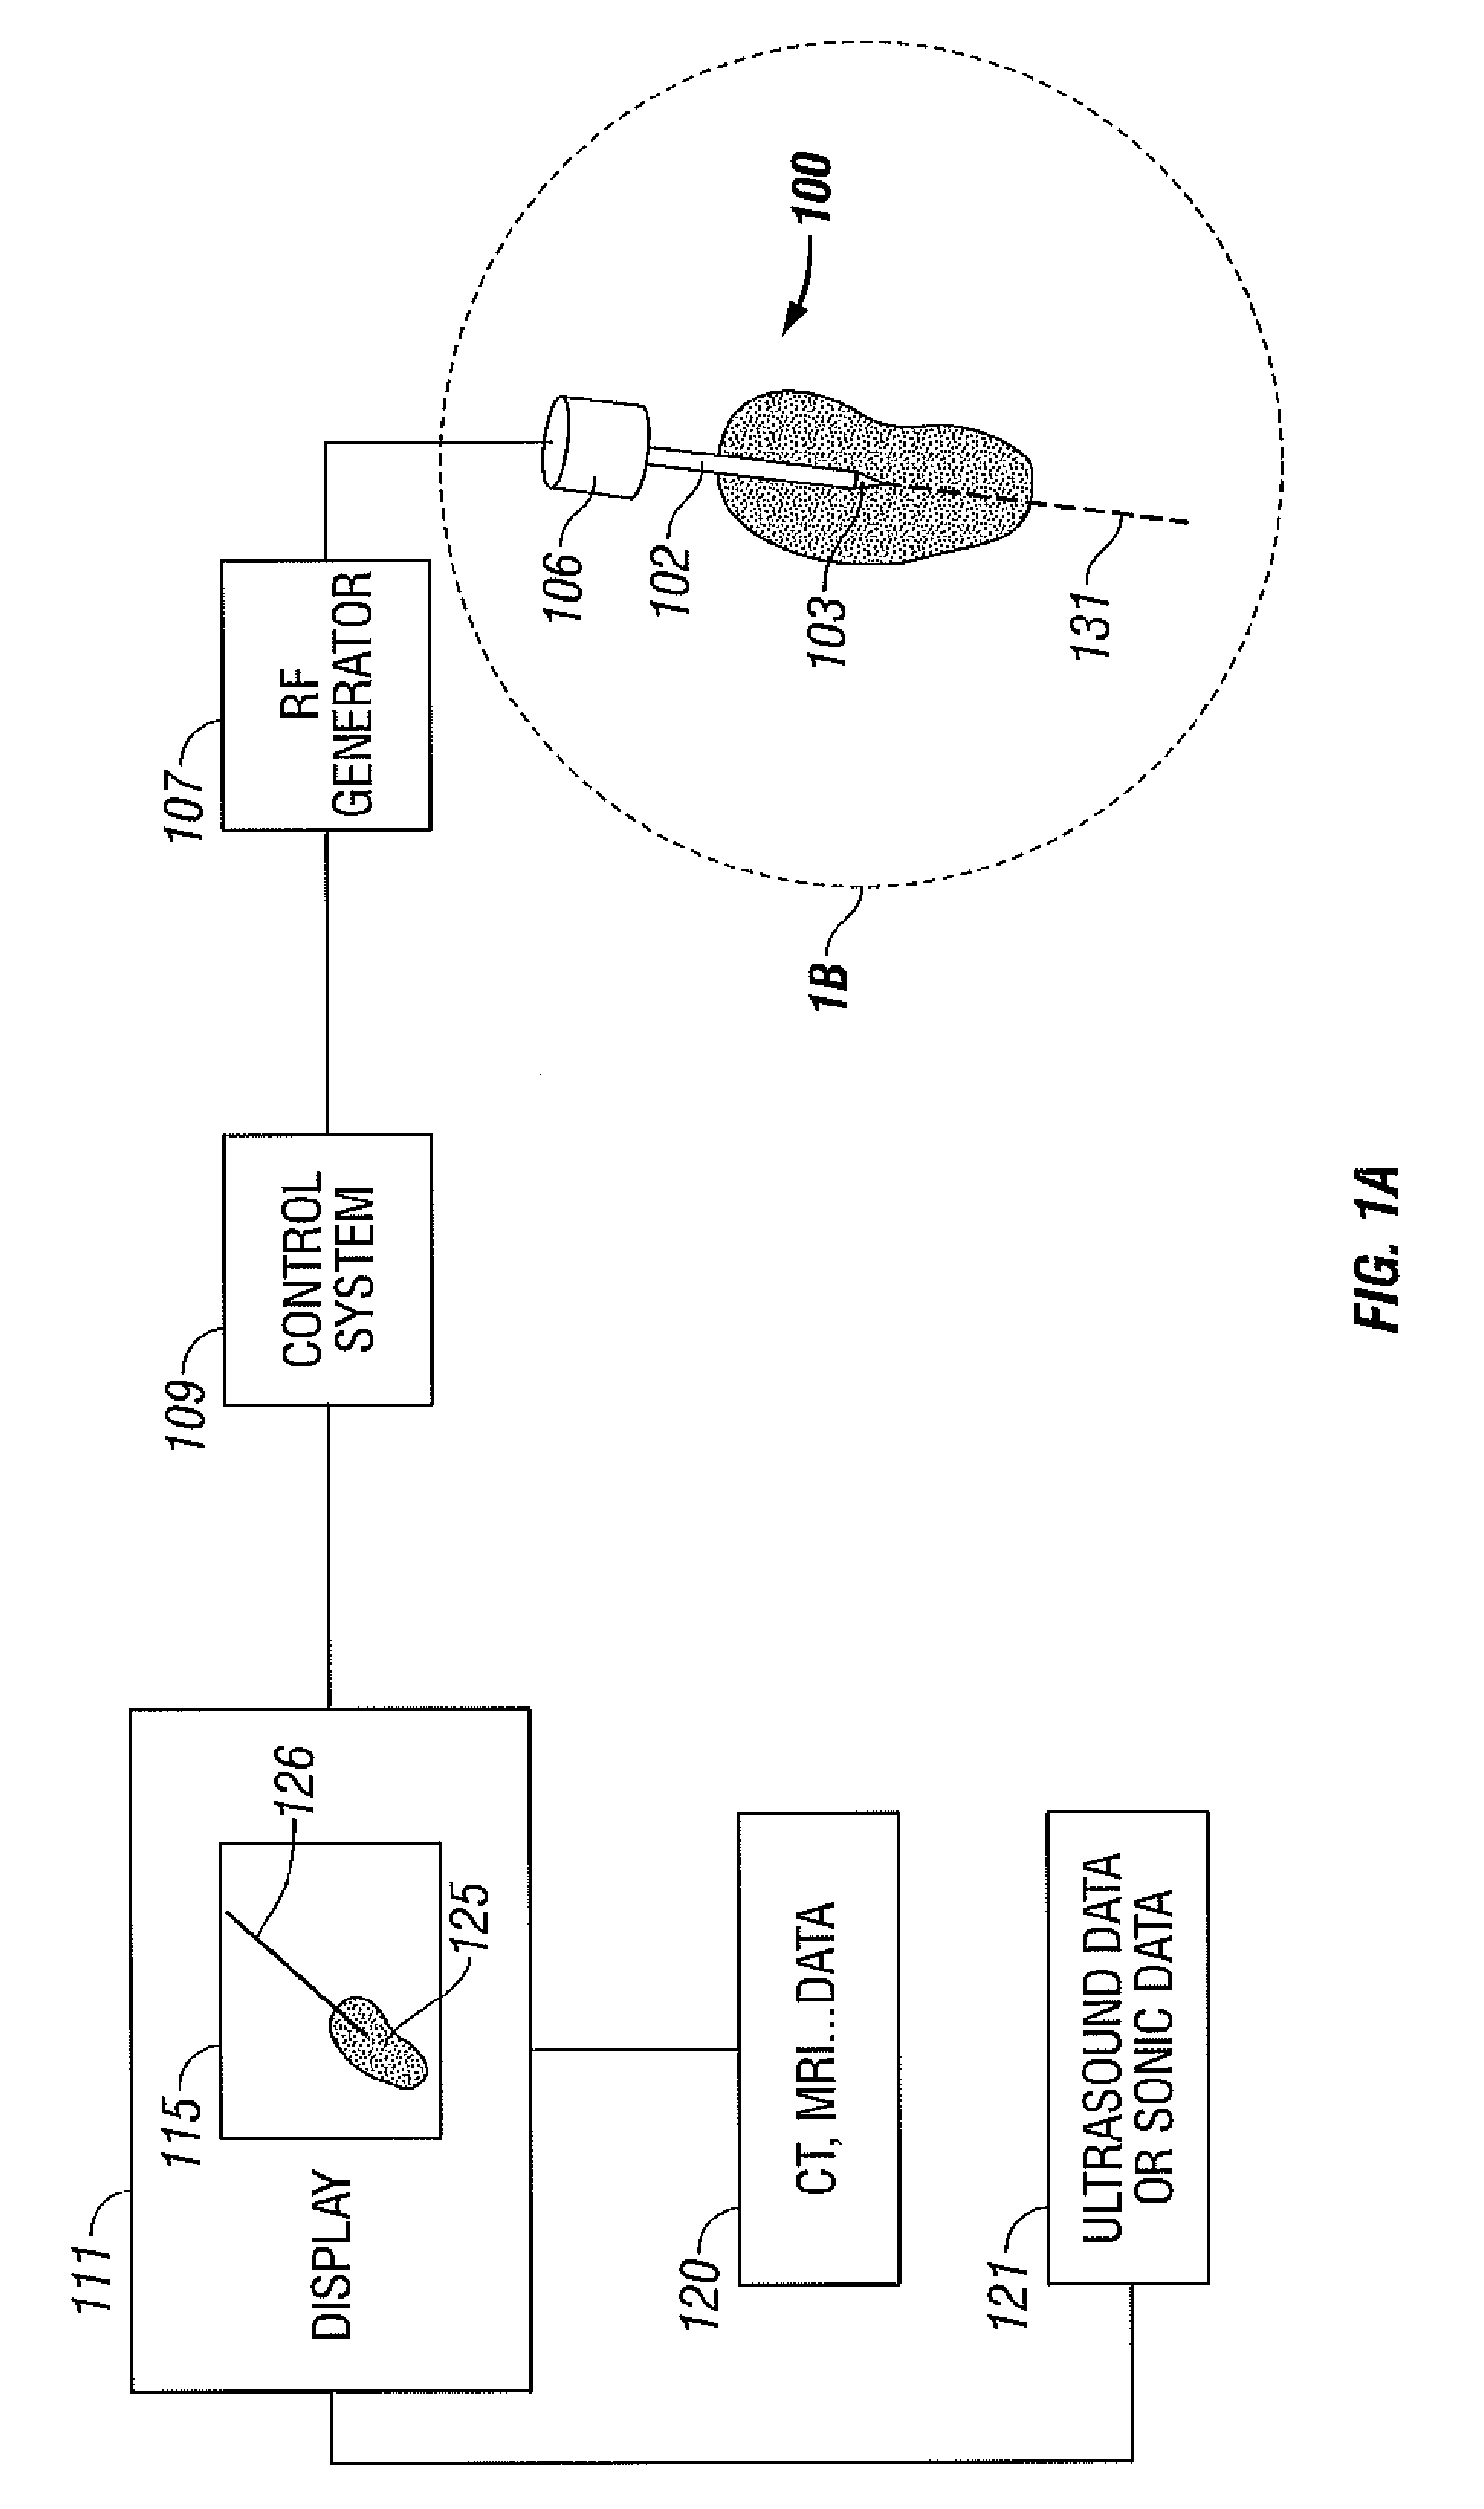 Method for Volume Determination and Geometric Reconstruction